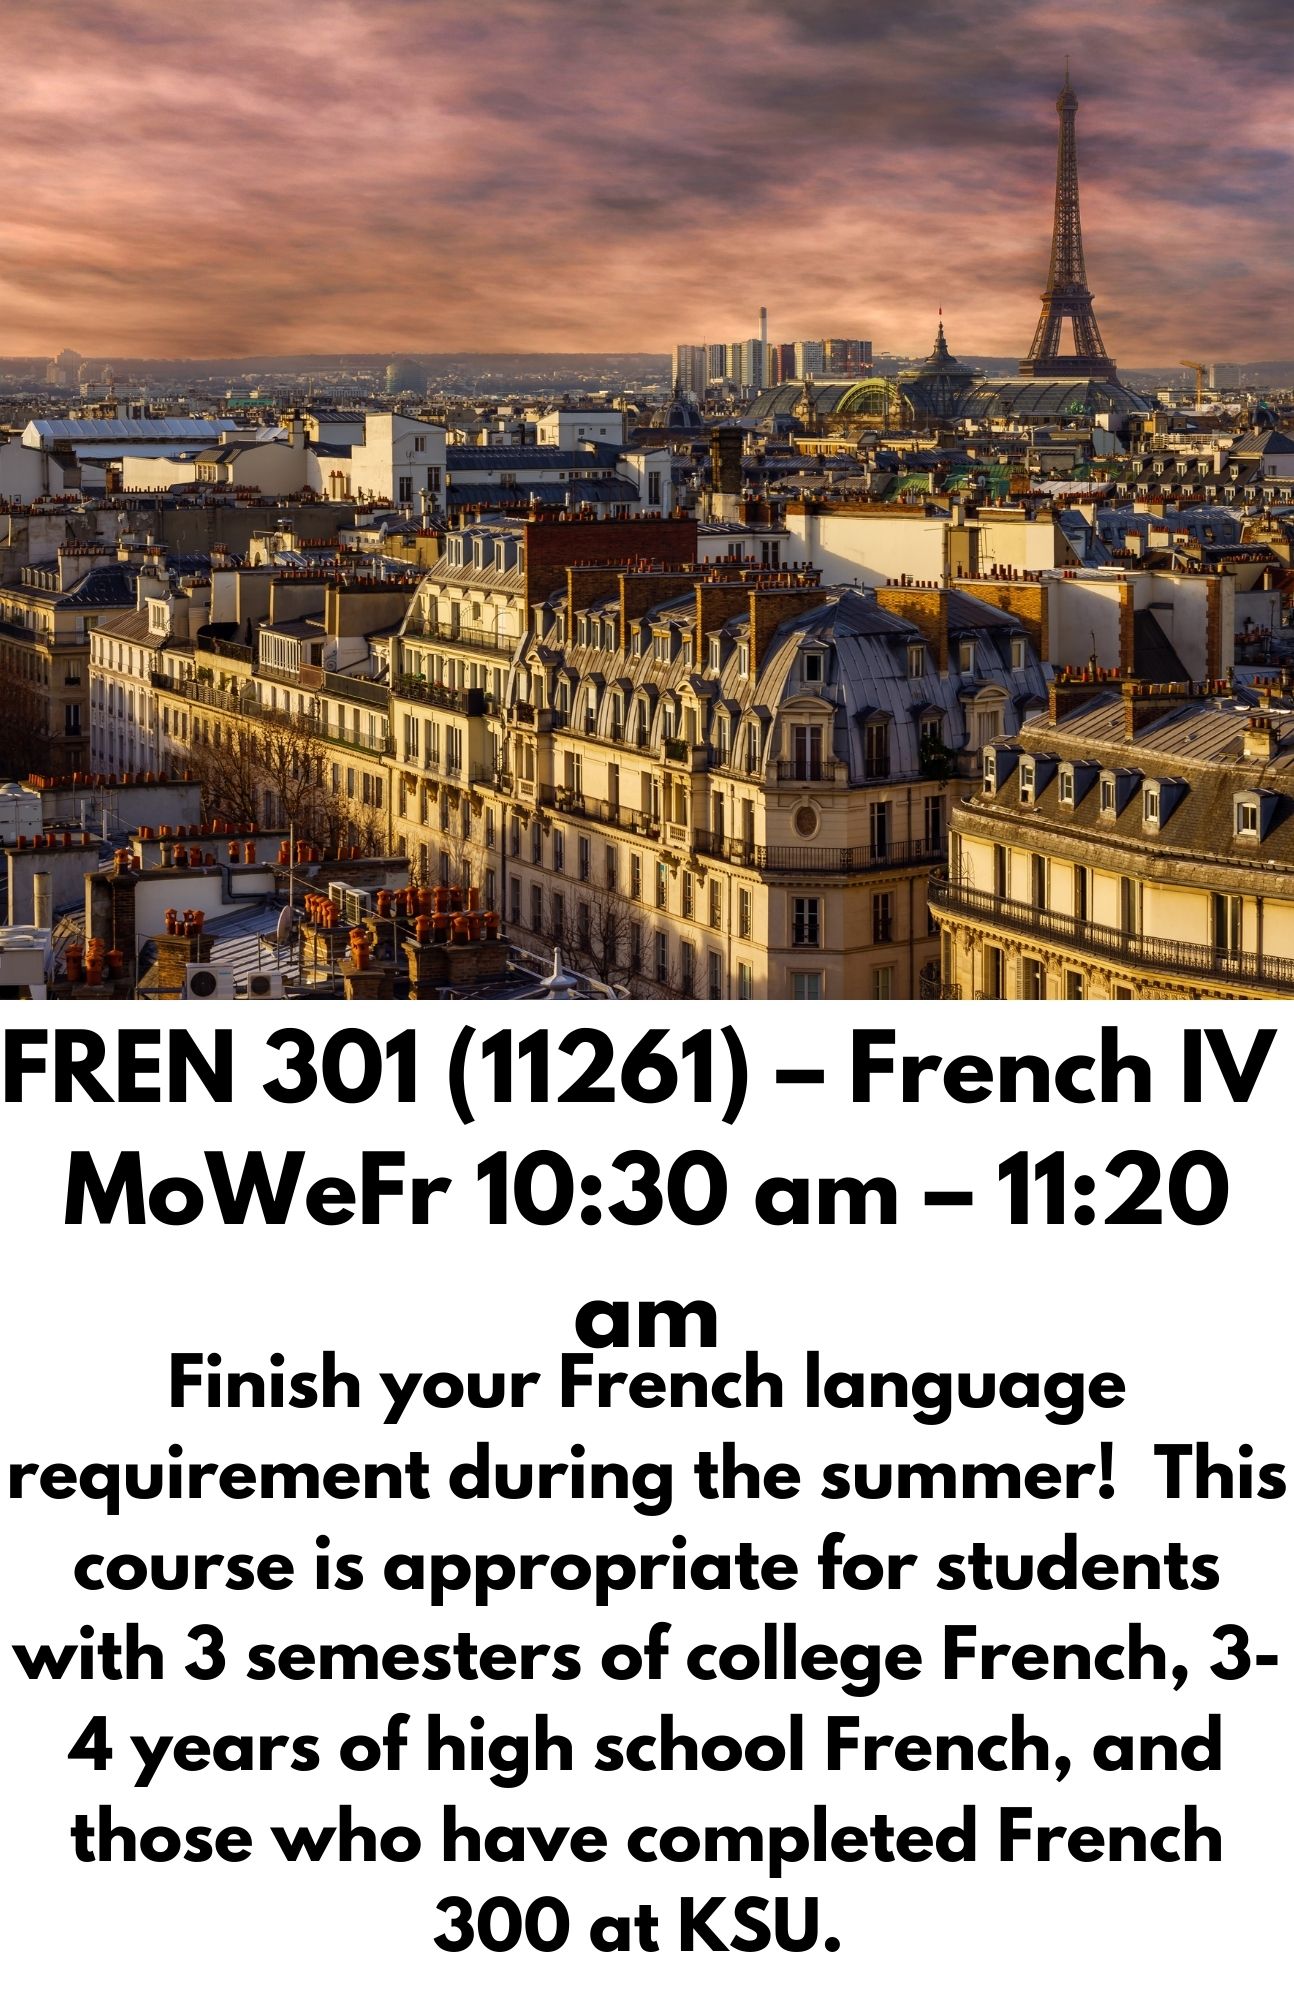 FREN 301 (11261) – French IV  MoWeFr 10:30 am – 11:20 am. Finish your French language requirement during the summer!  This course is appropriate for students with 3 semesters of college French, 3-4 years of high school French, and those who have completed French 300 at KSU.